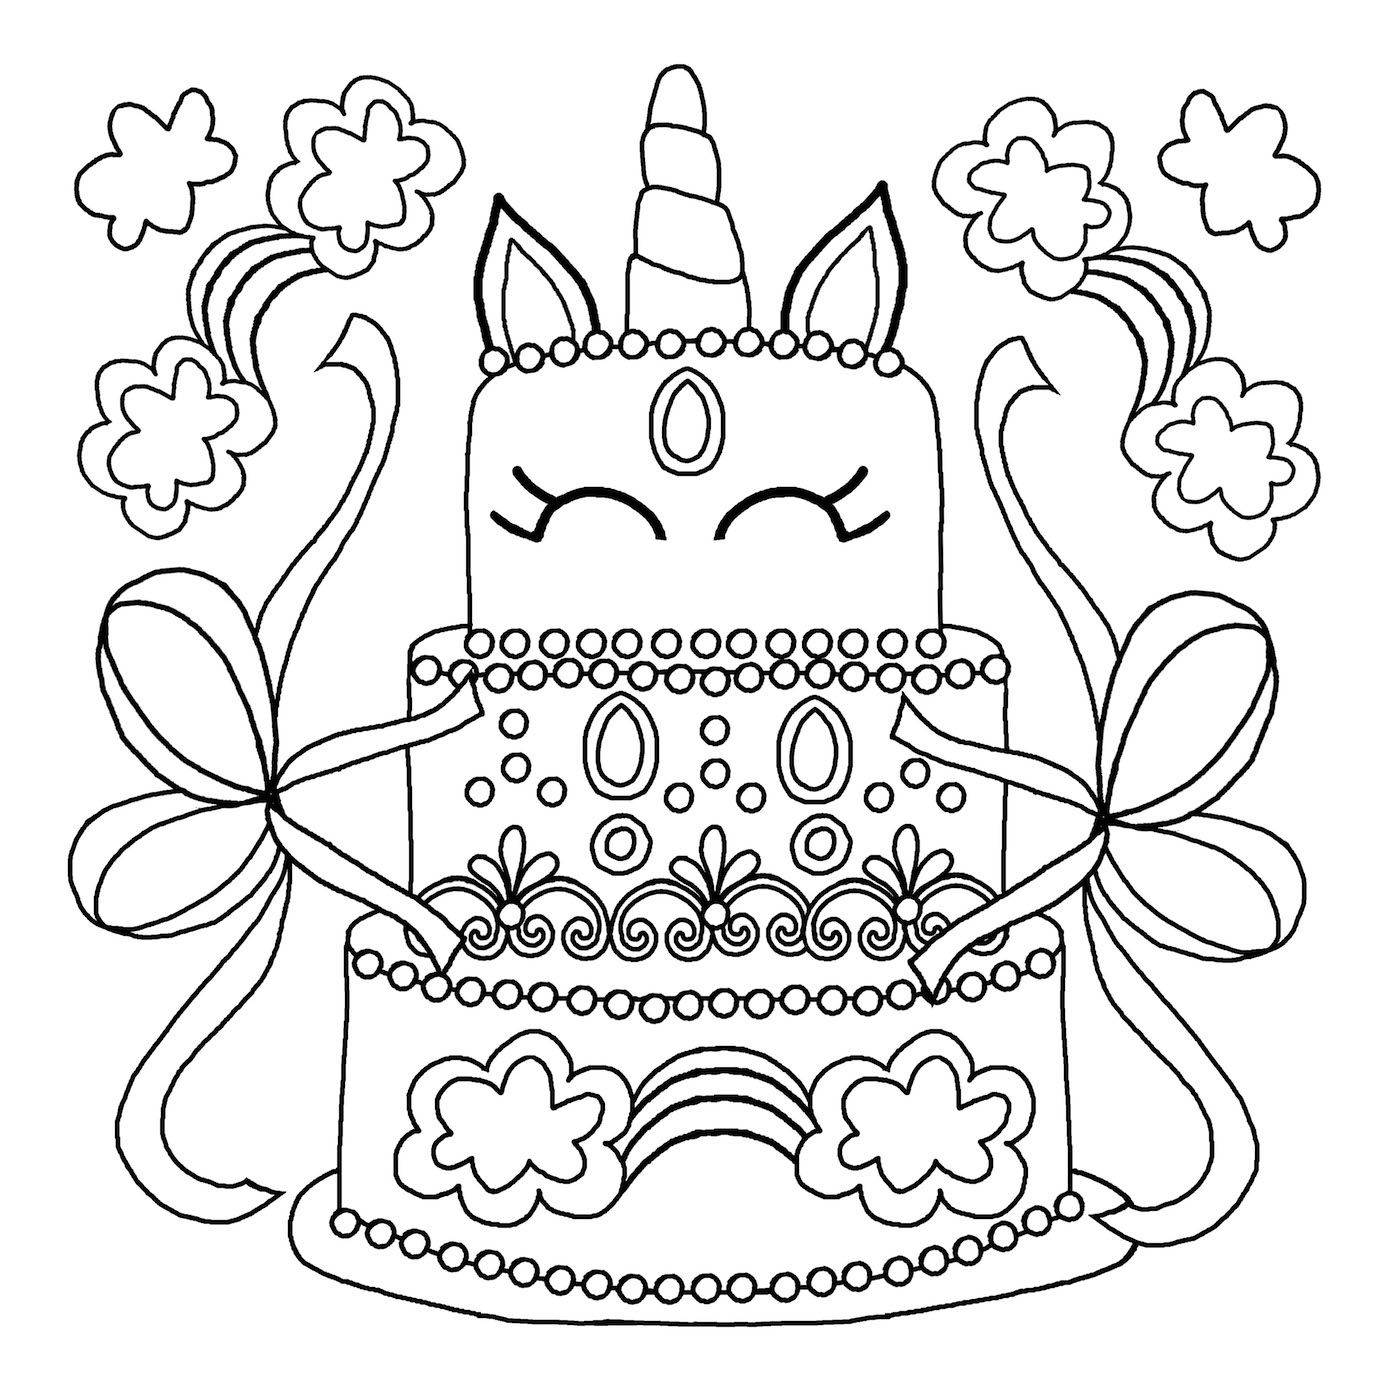 Unicorn Coloring Pages Ideas With Printable PDF - Free Coloring Sheets |  Mermaid coloring pages, Unicorn coloring pages, Christmas coloring pages